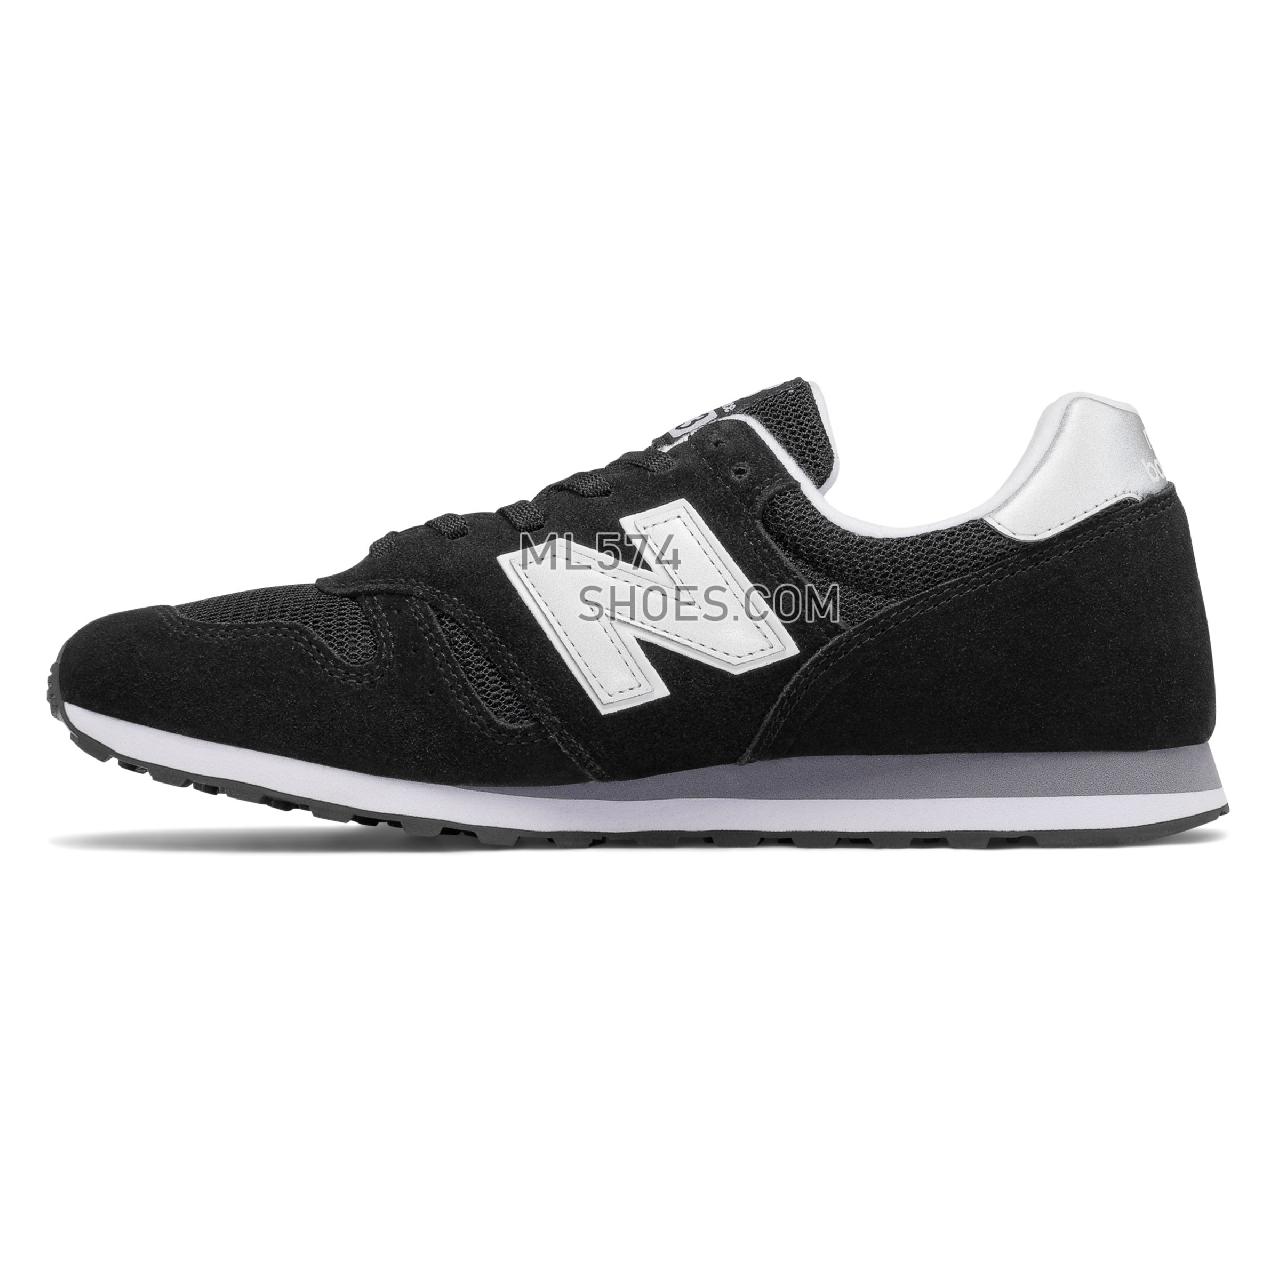 New Balance 373 Modern Classics - Men's Classic Sneakers - Black with Silver - ML373GRE